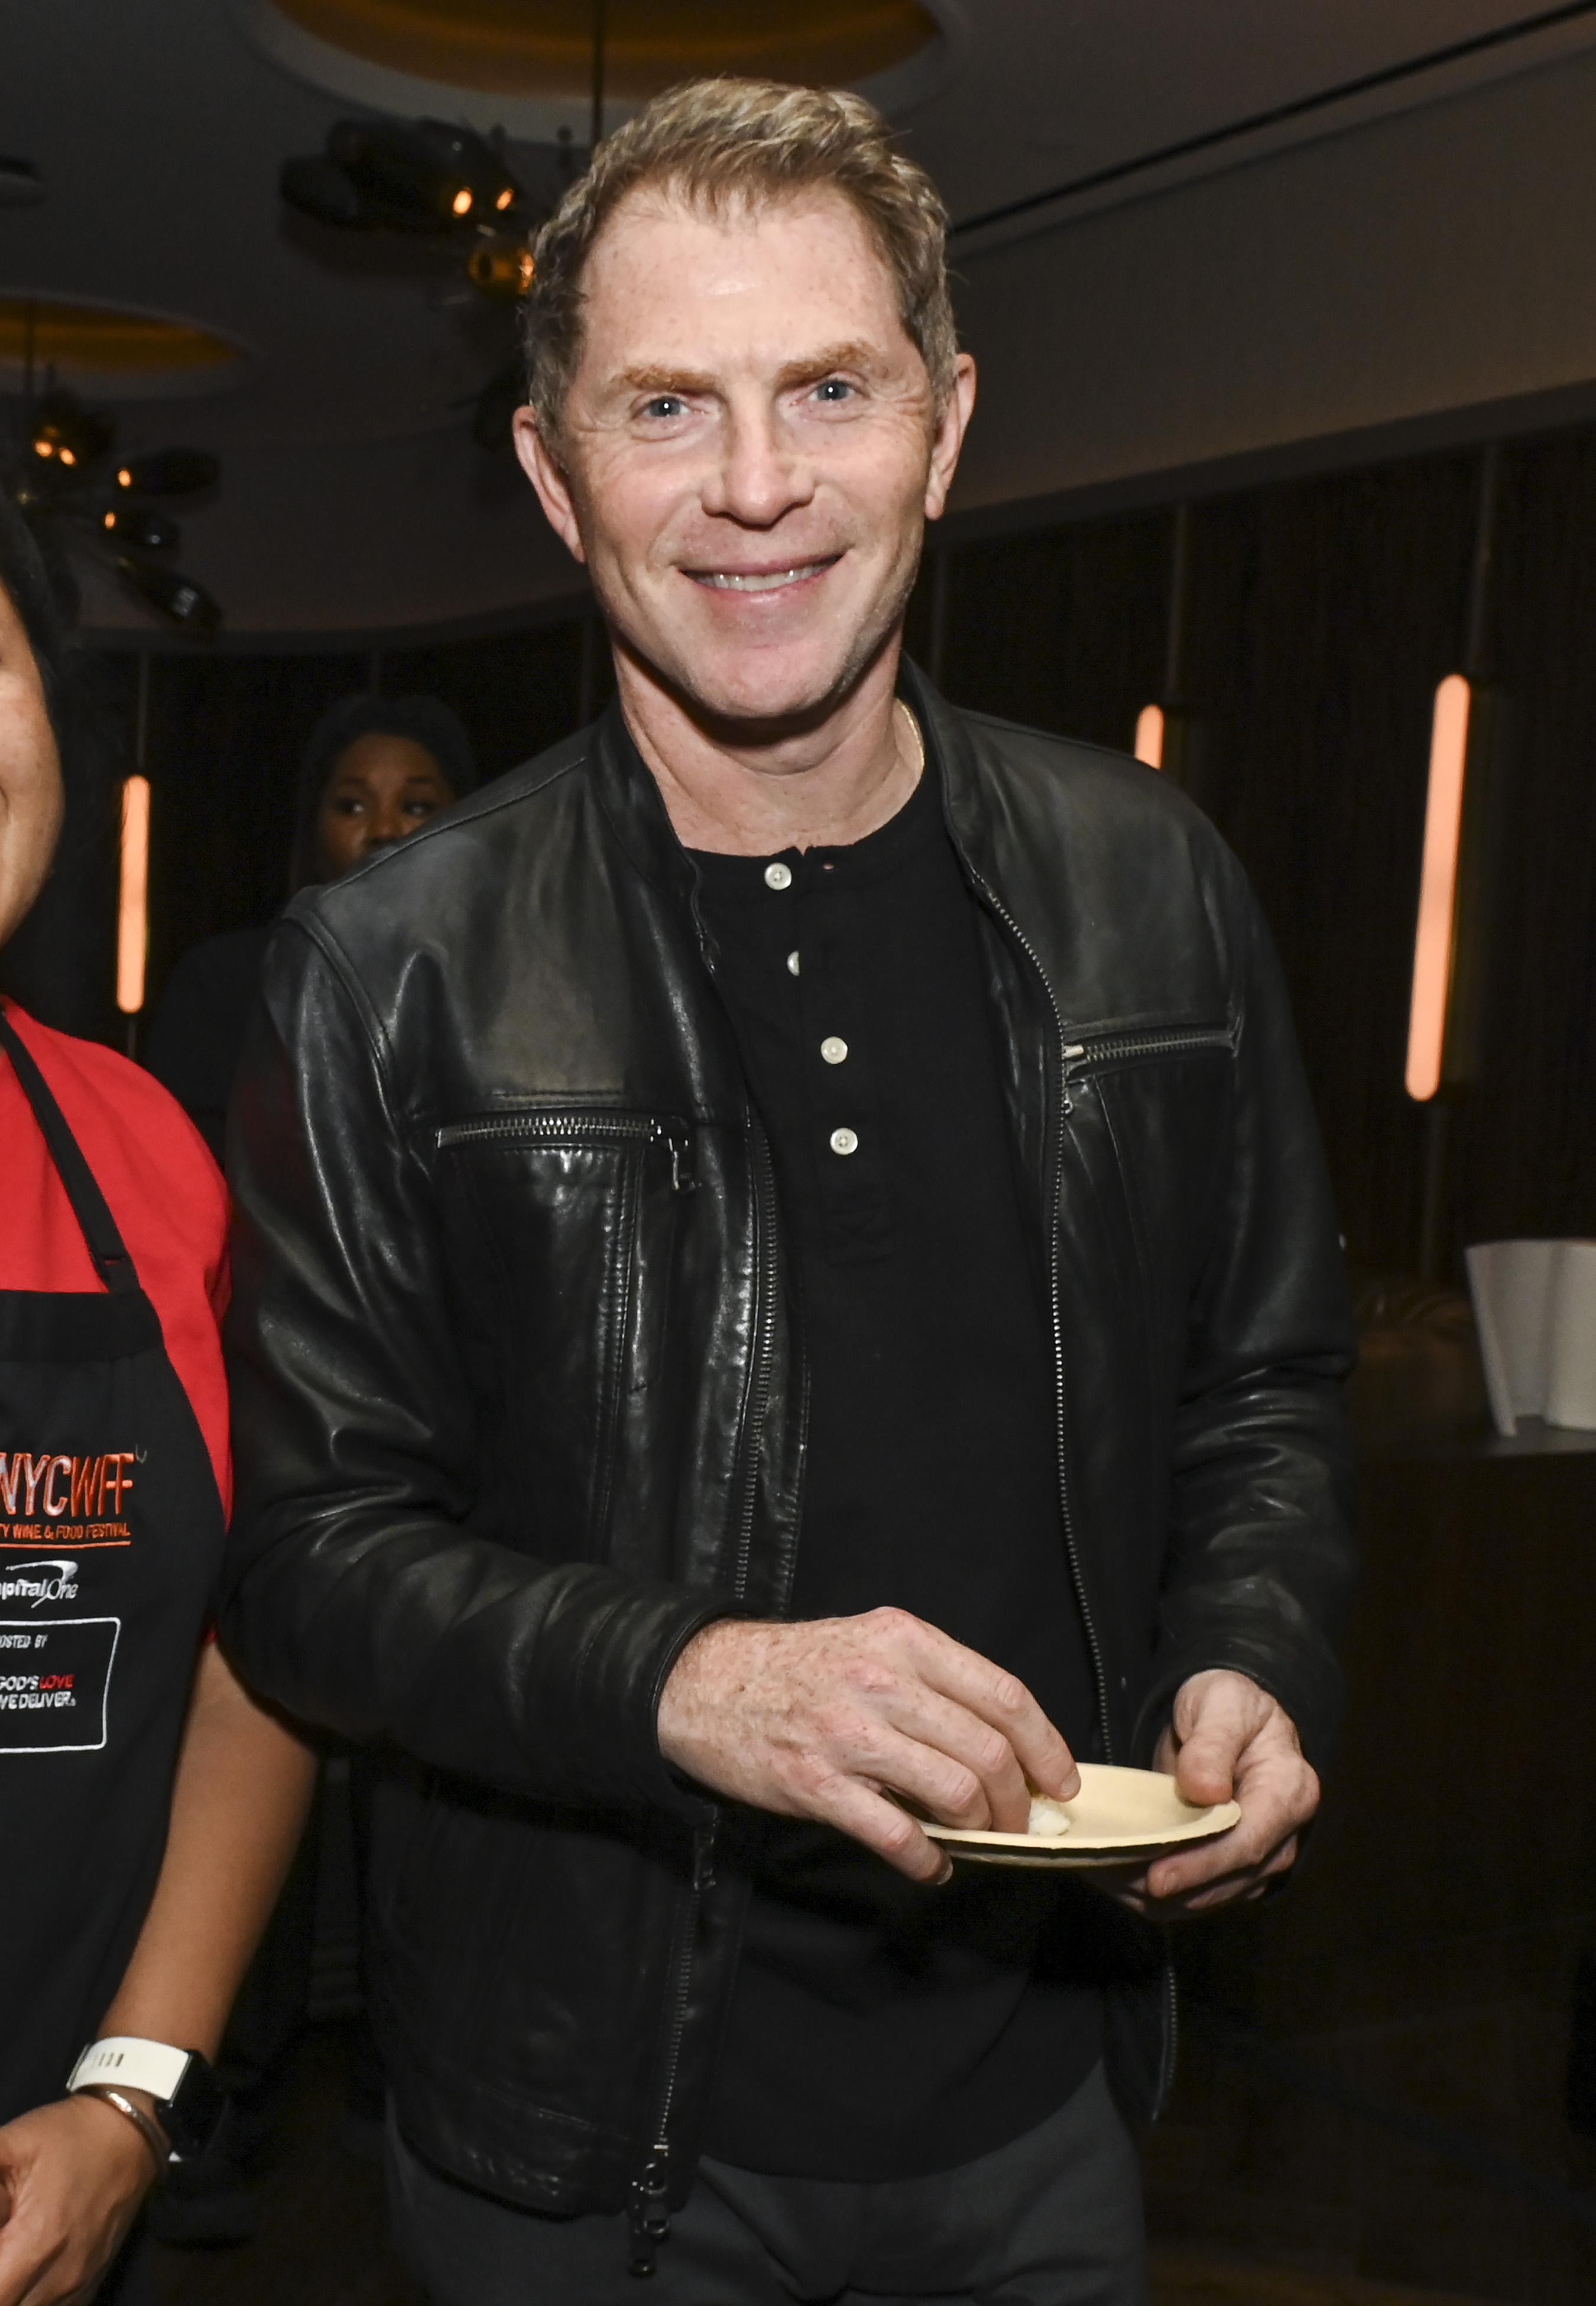 Bobby Flay at Taste of Asia hosted by Jet Tila during the Food Network New York City Wine & Food Festival on October 14, 2022, in New York City. | Source: Getty Images